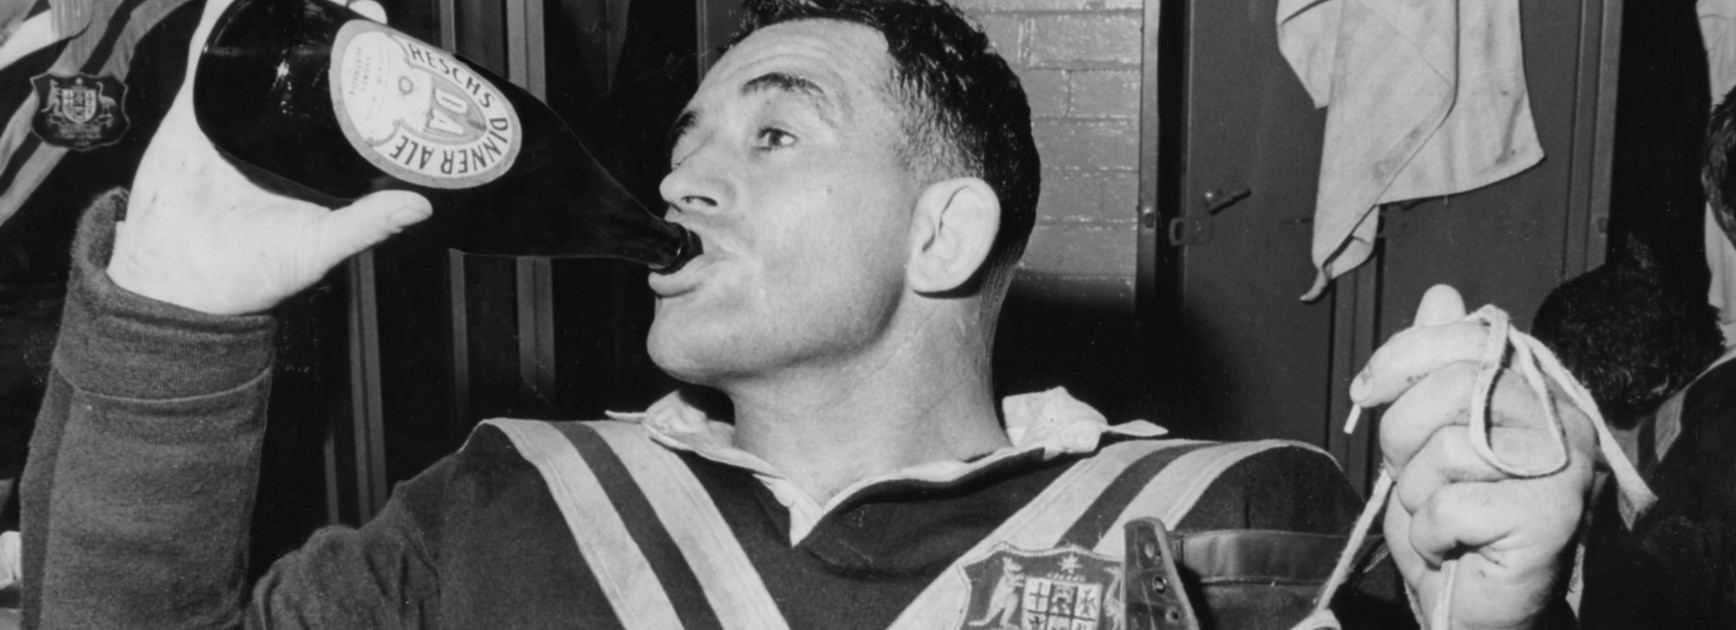 Swansong	Walsh retired from international rugby league in 1966 after the successful Ashes campaign.